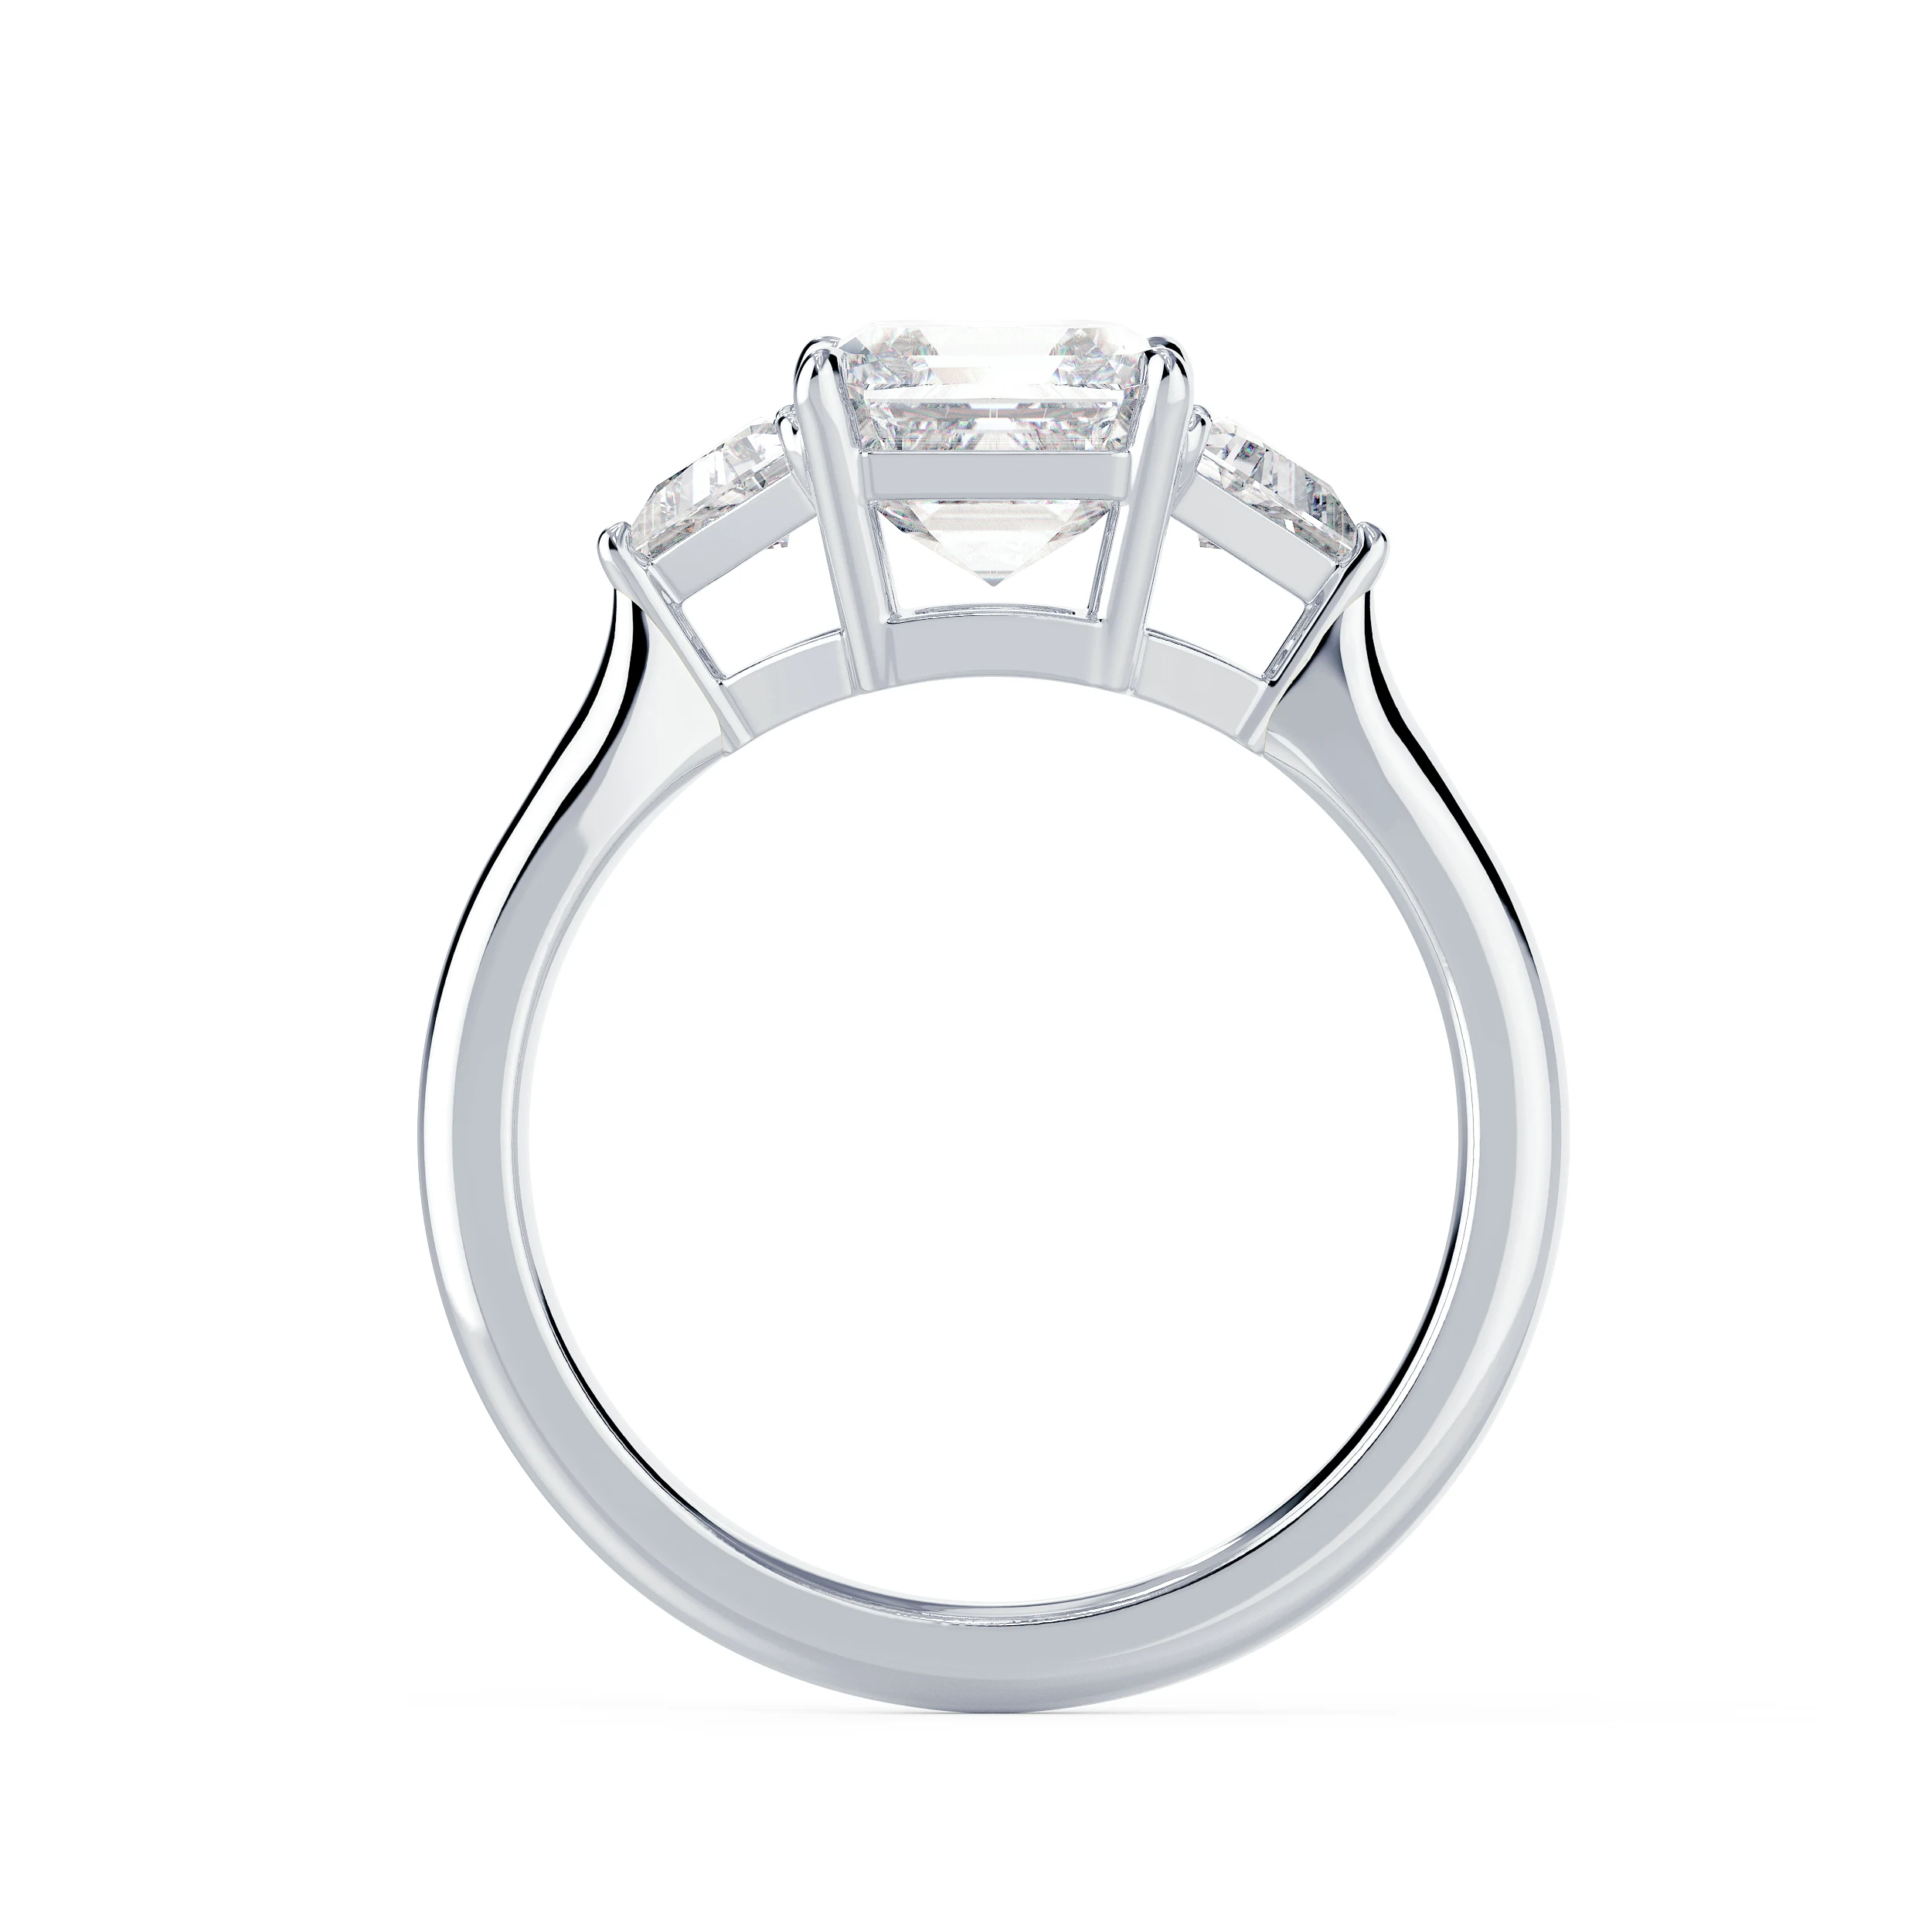 Synthetic Diamonds set in White Gold Asscher and Trillion Diamond Engagement Ring (Profile View)